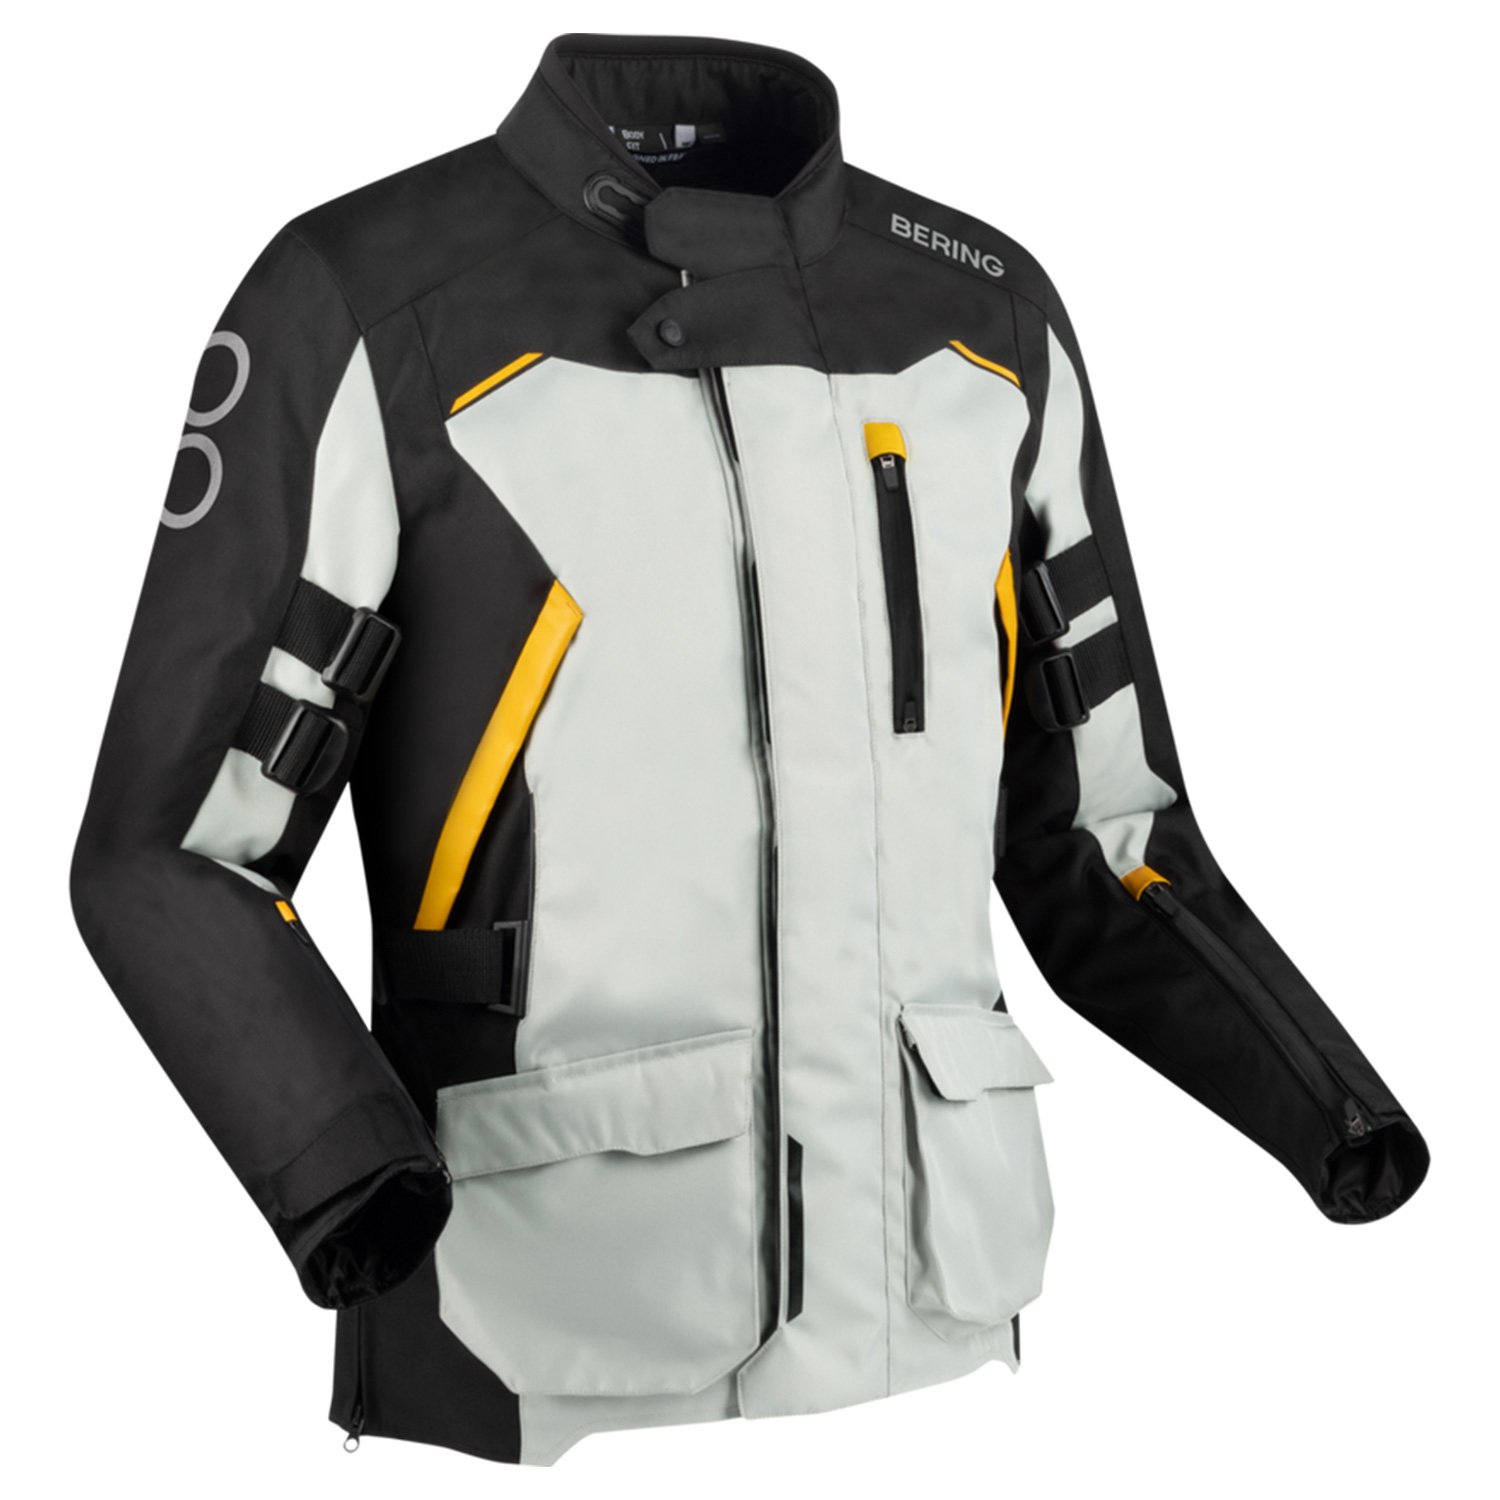 Image of Bering Zephyr Jacket Black Grey Yellow Taille 3XL